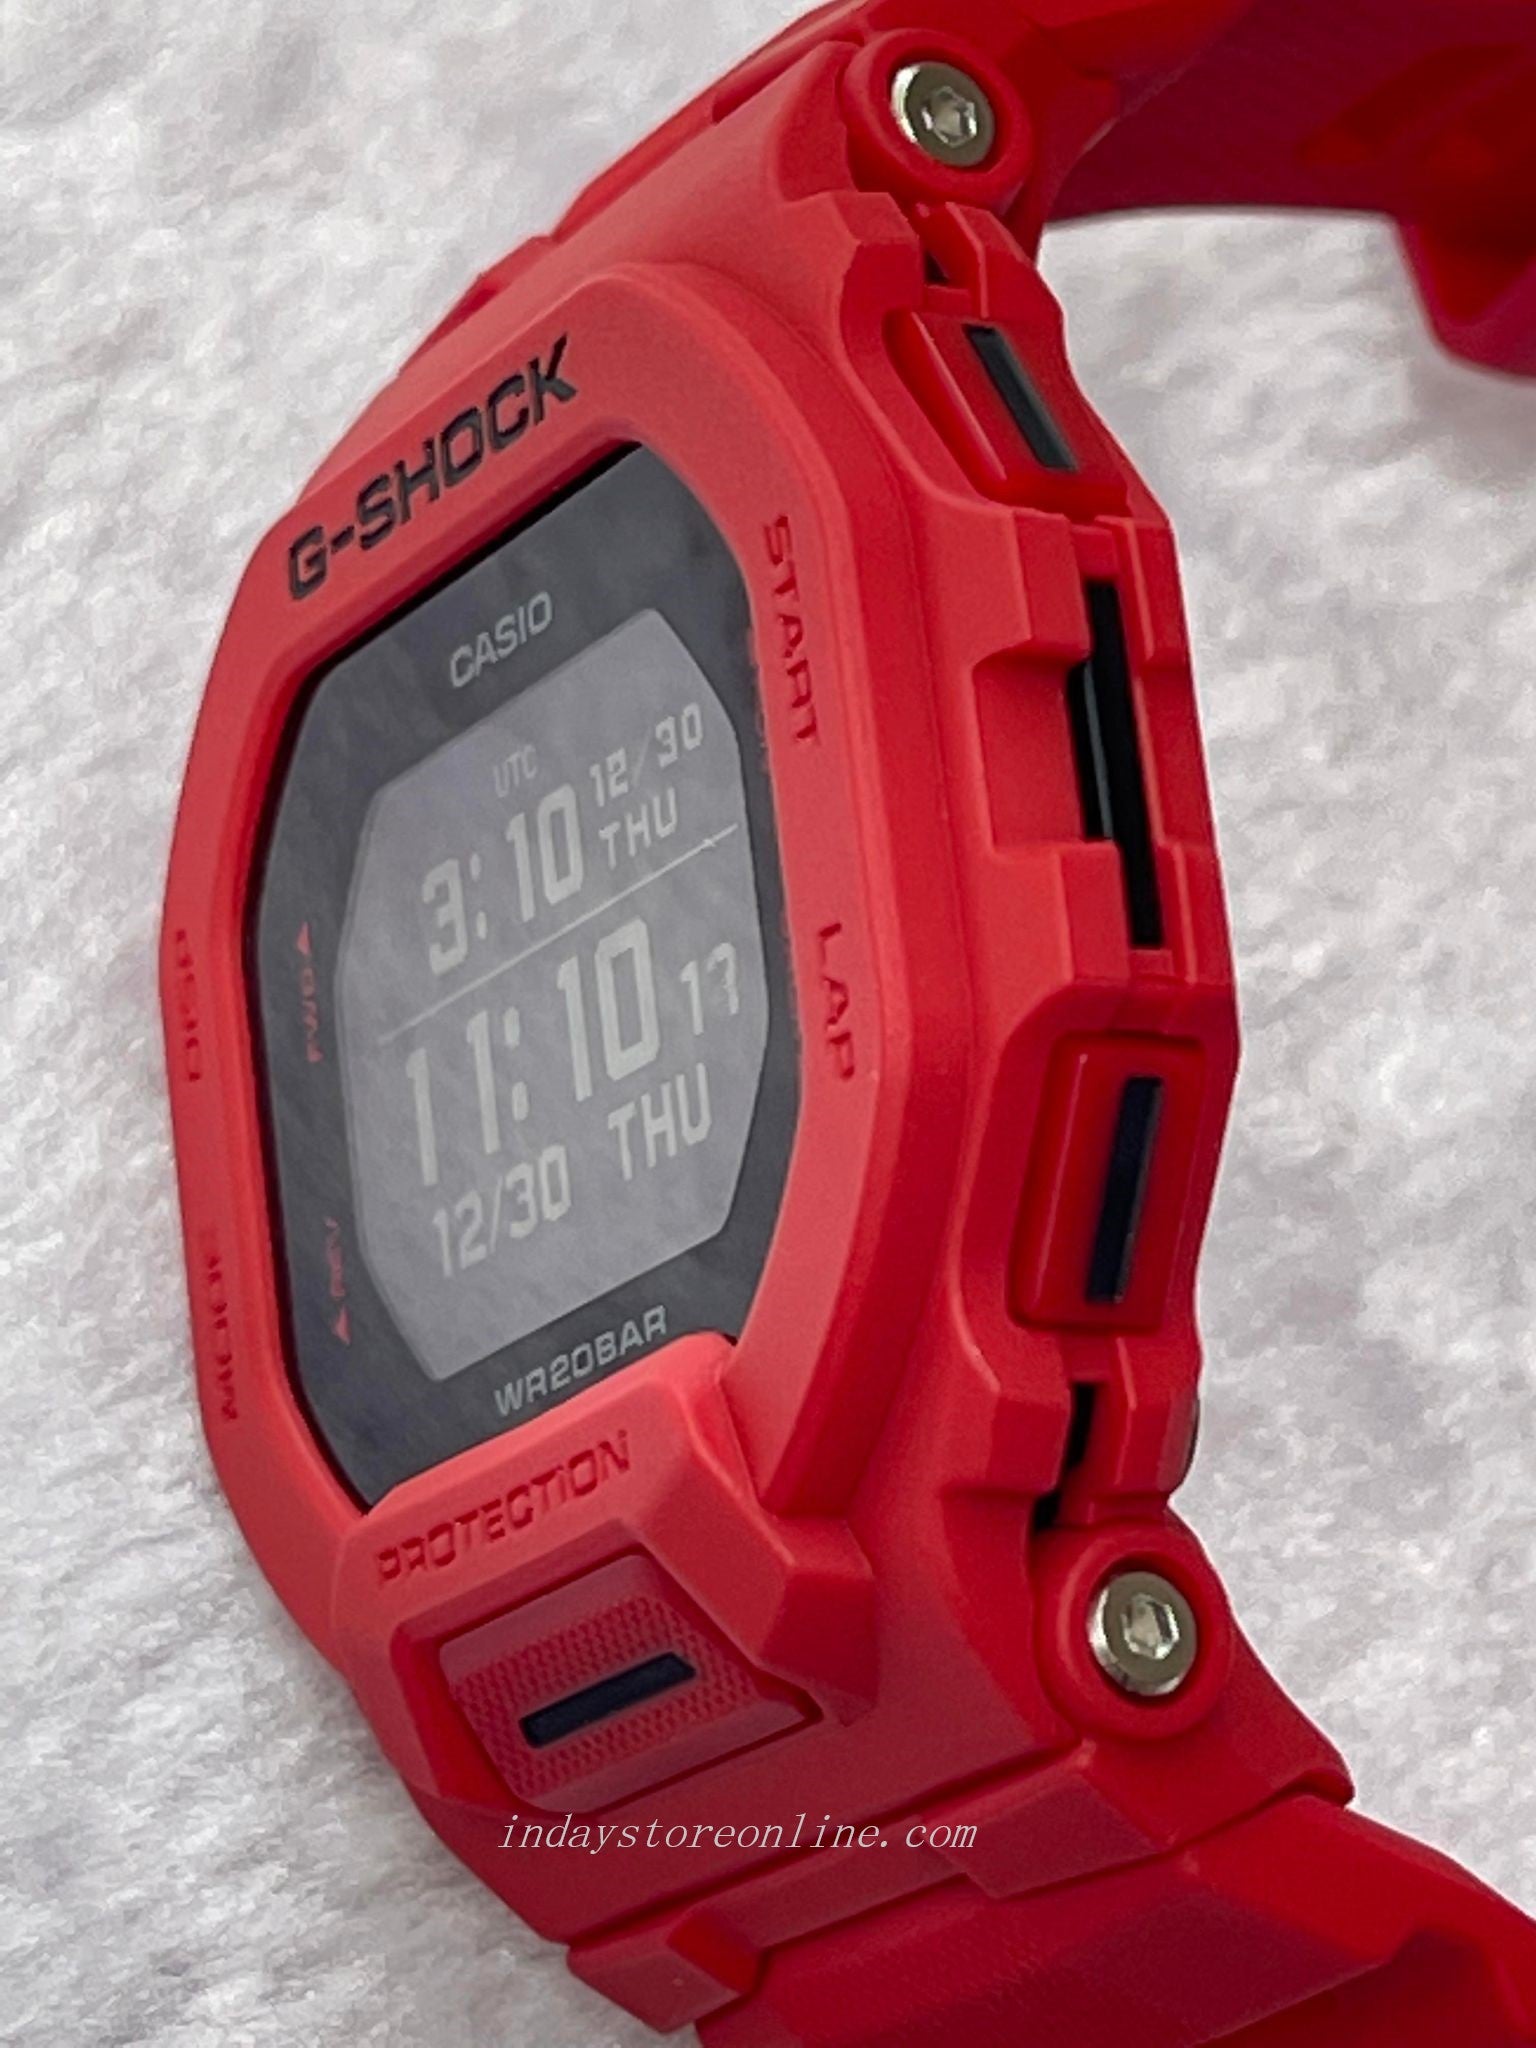 Casio G-Shock Men's Watch GBD-200RD-4 Digital G-Squad Red Out Sports  Edition Great for Runner Mobile link (Automatic connection, wireless  linking 